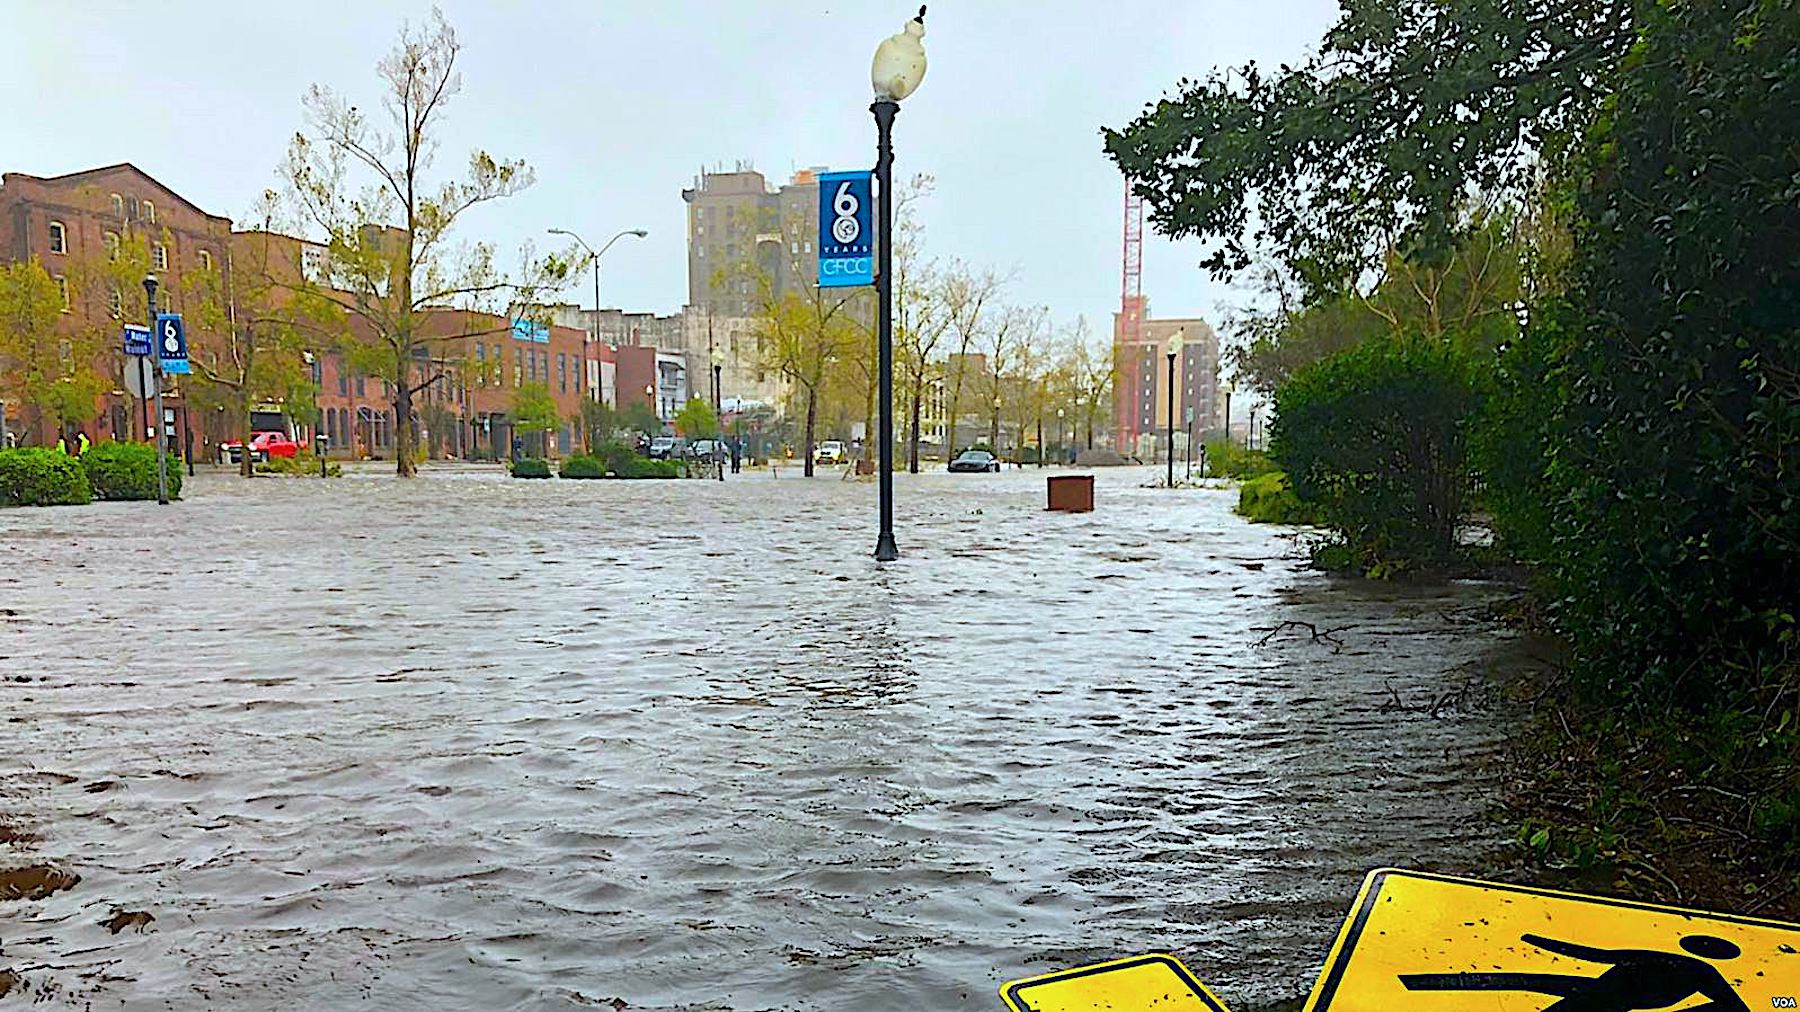 Flooded streets with a fallen pedestrian crossing sign.